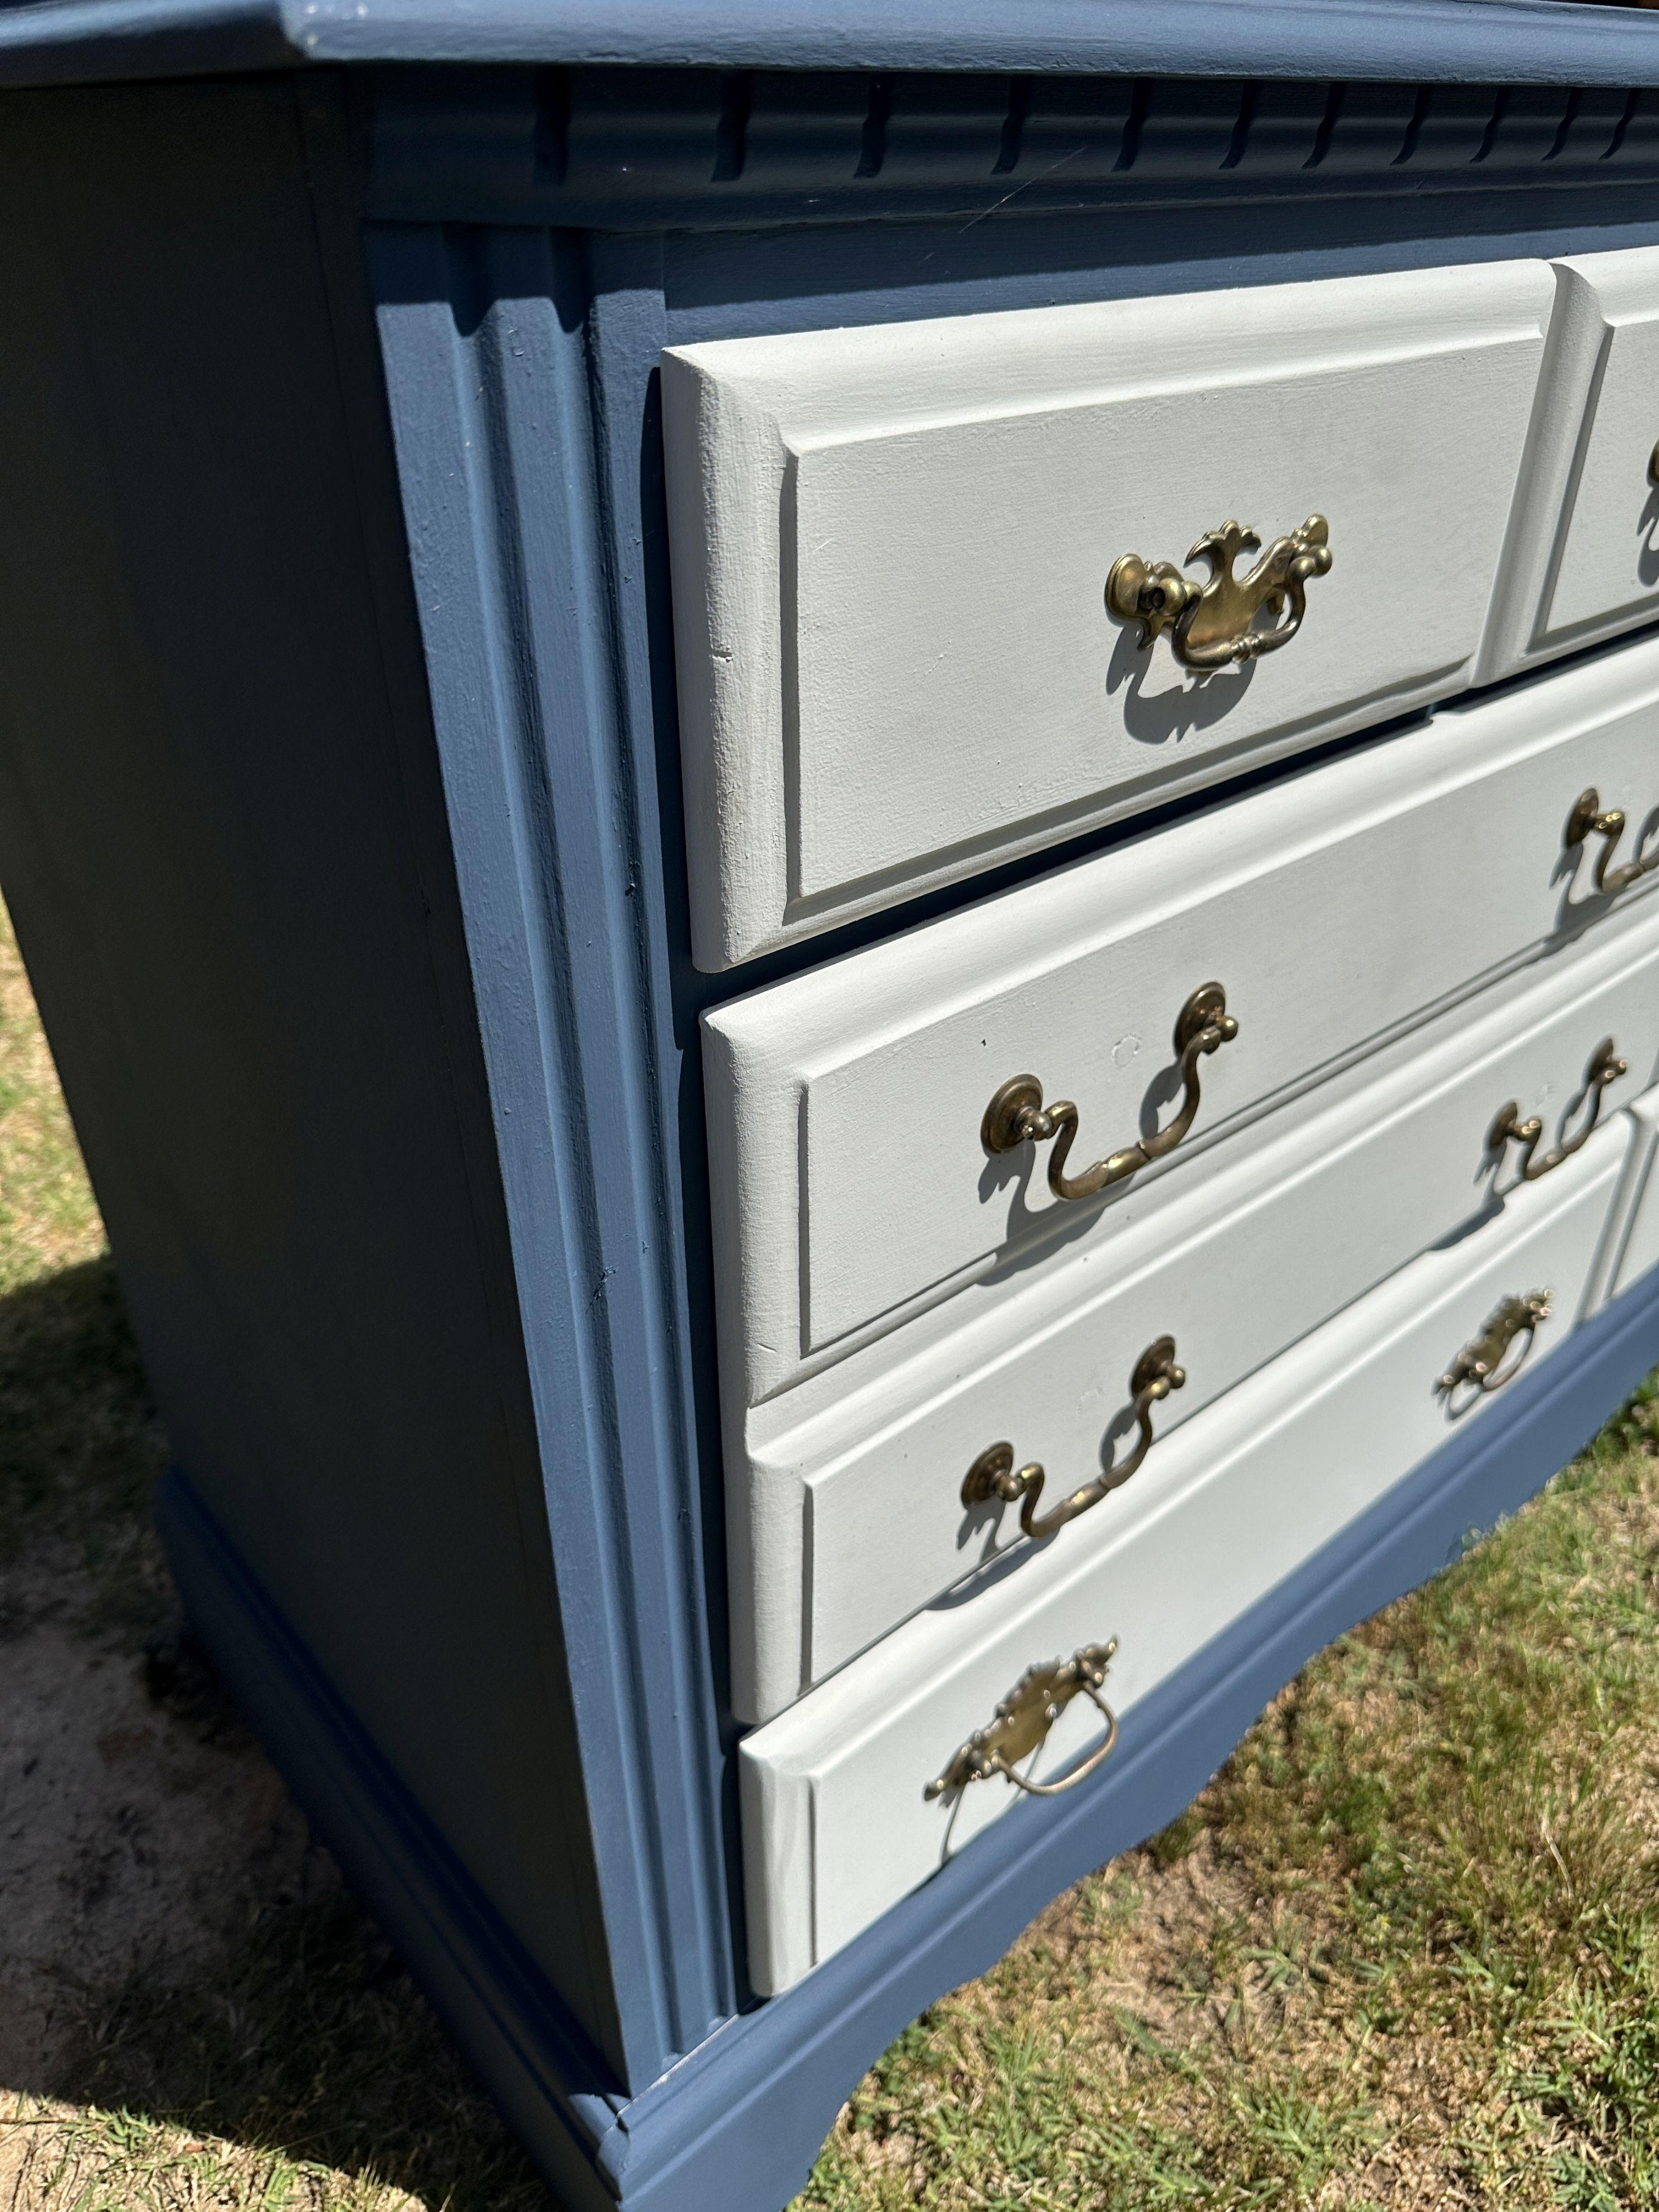 Broyhill 7 Drawer Painted Dresser/Approx 53 Inches Long (Local Pick Up Only)